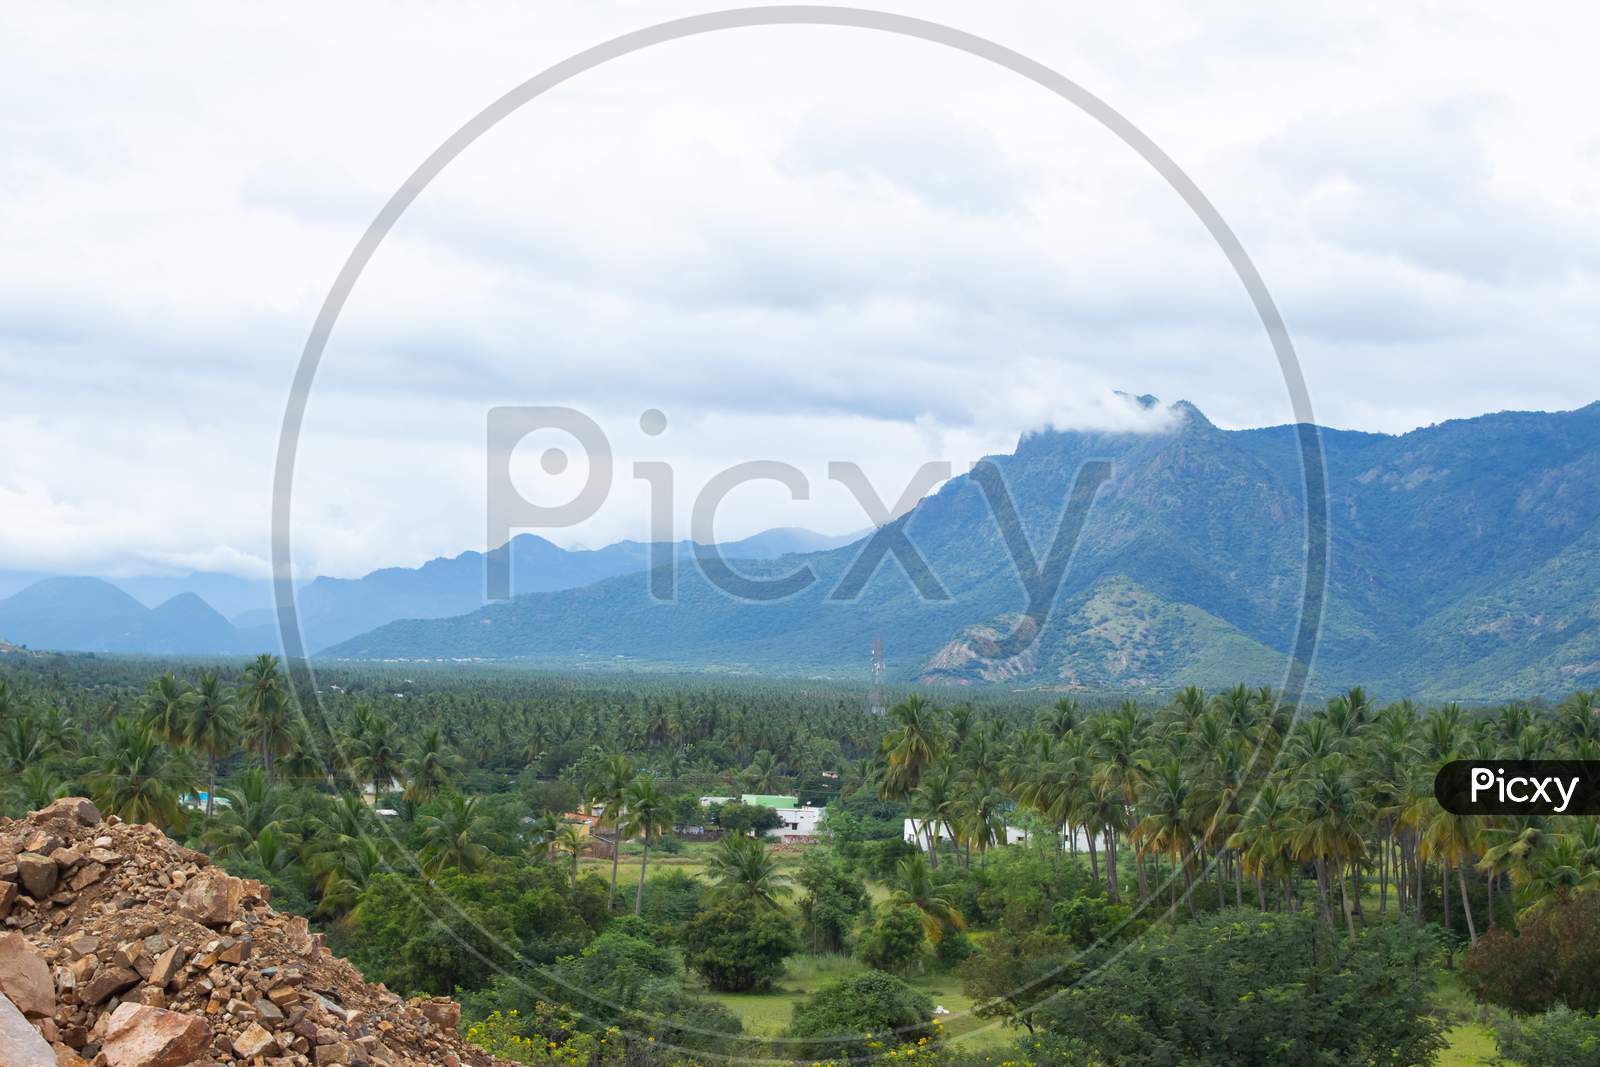 Hills And Farmlands Of South India - Tamilnadu Landscape . Beautiful Farmlands - A View From The Hills Of Theni District, South India. Stock Images.